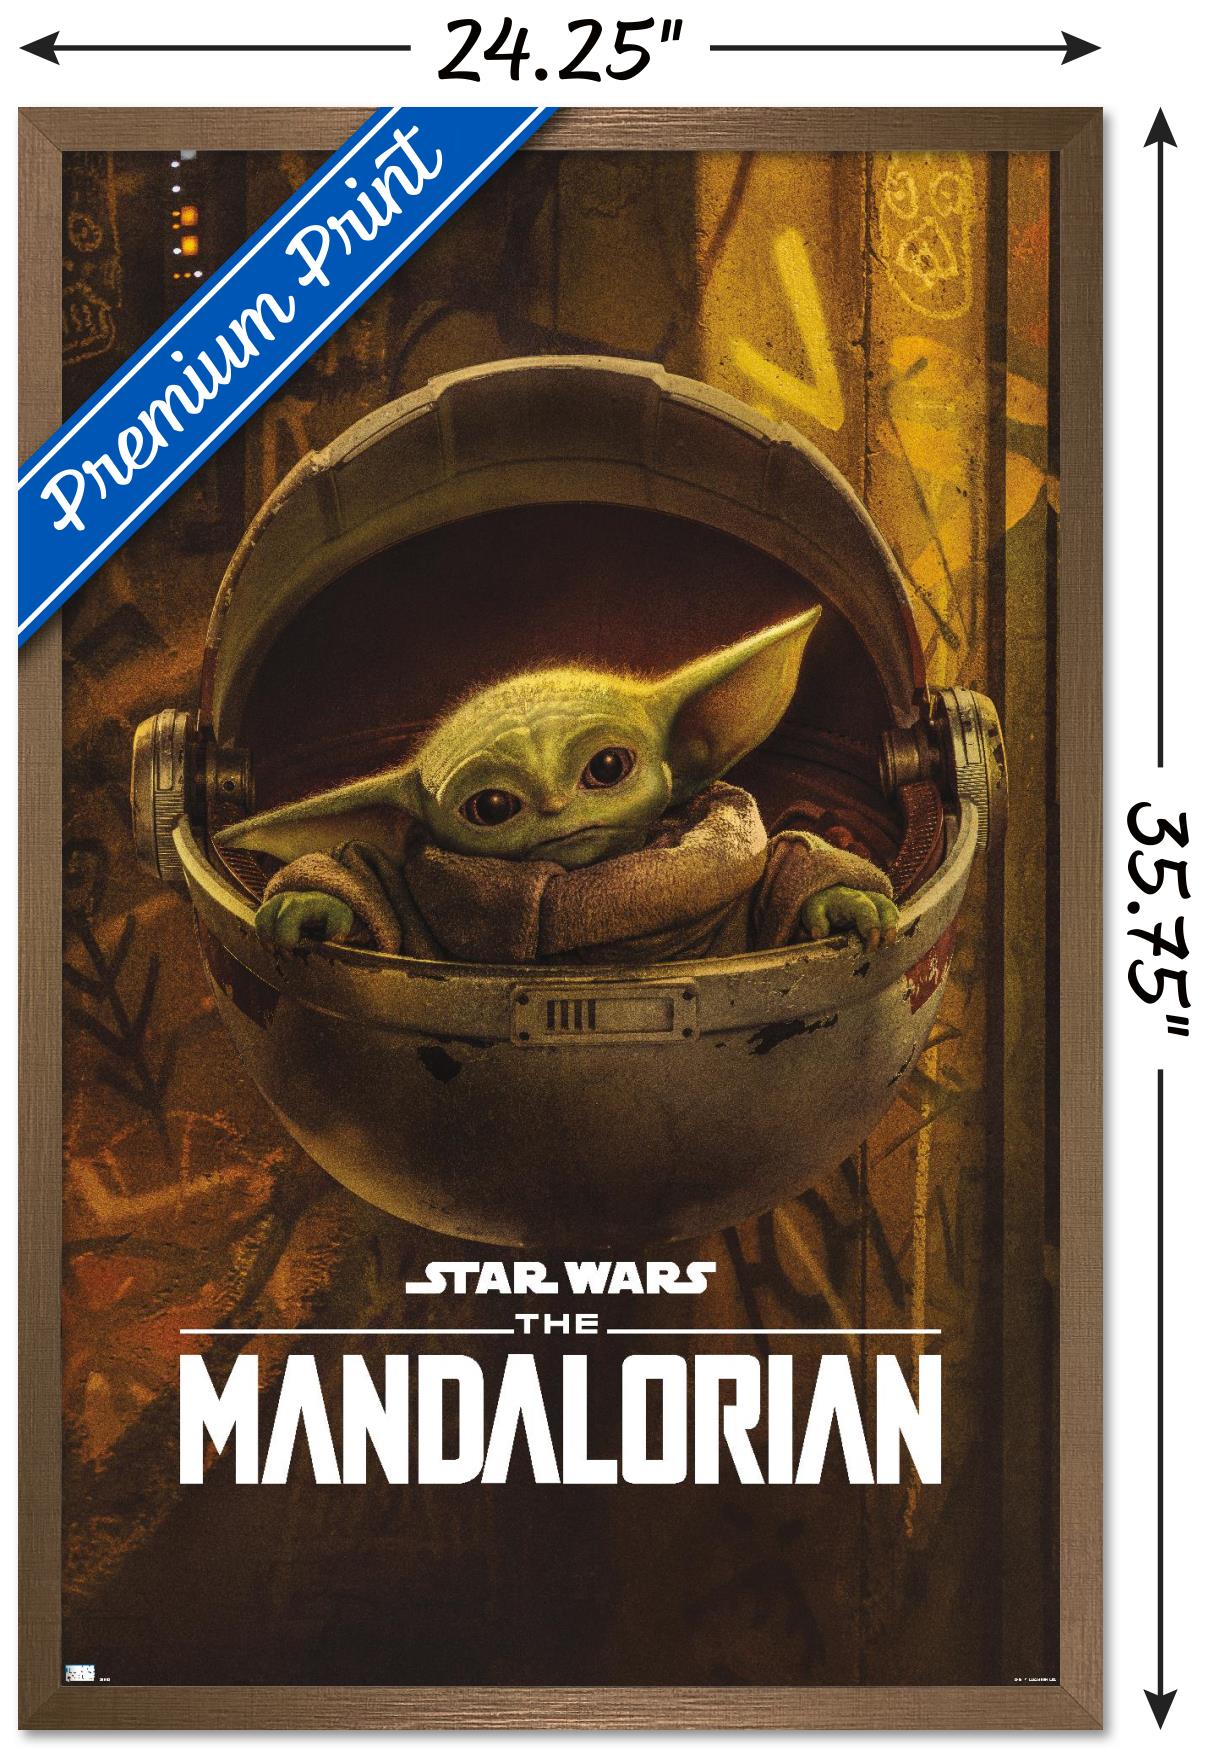 Star Wars: The Mandalorian Season 2 - The Child Wall Poster, 22.375" x 34", Framed - image 3 of 5